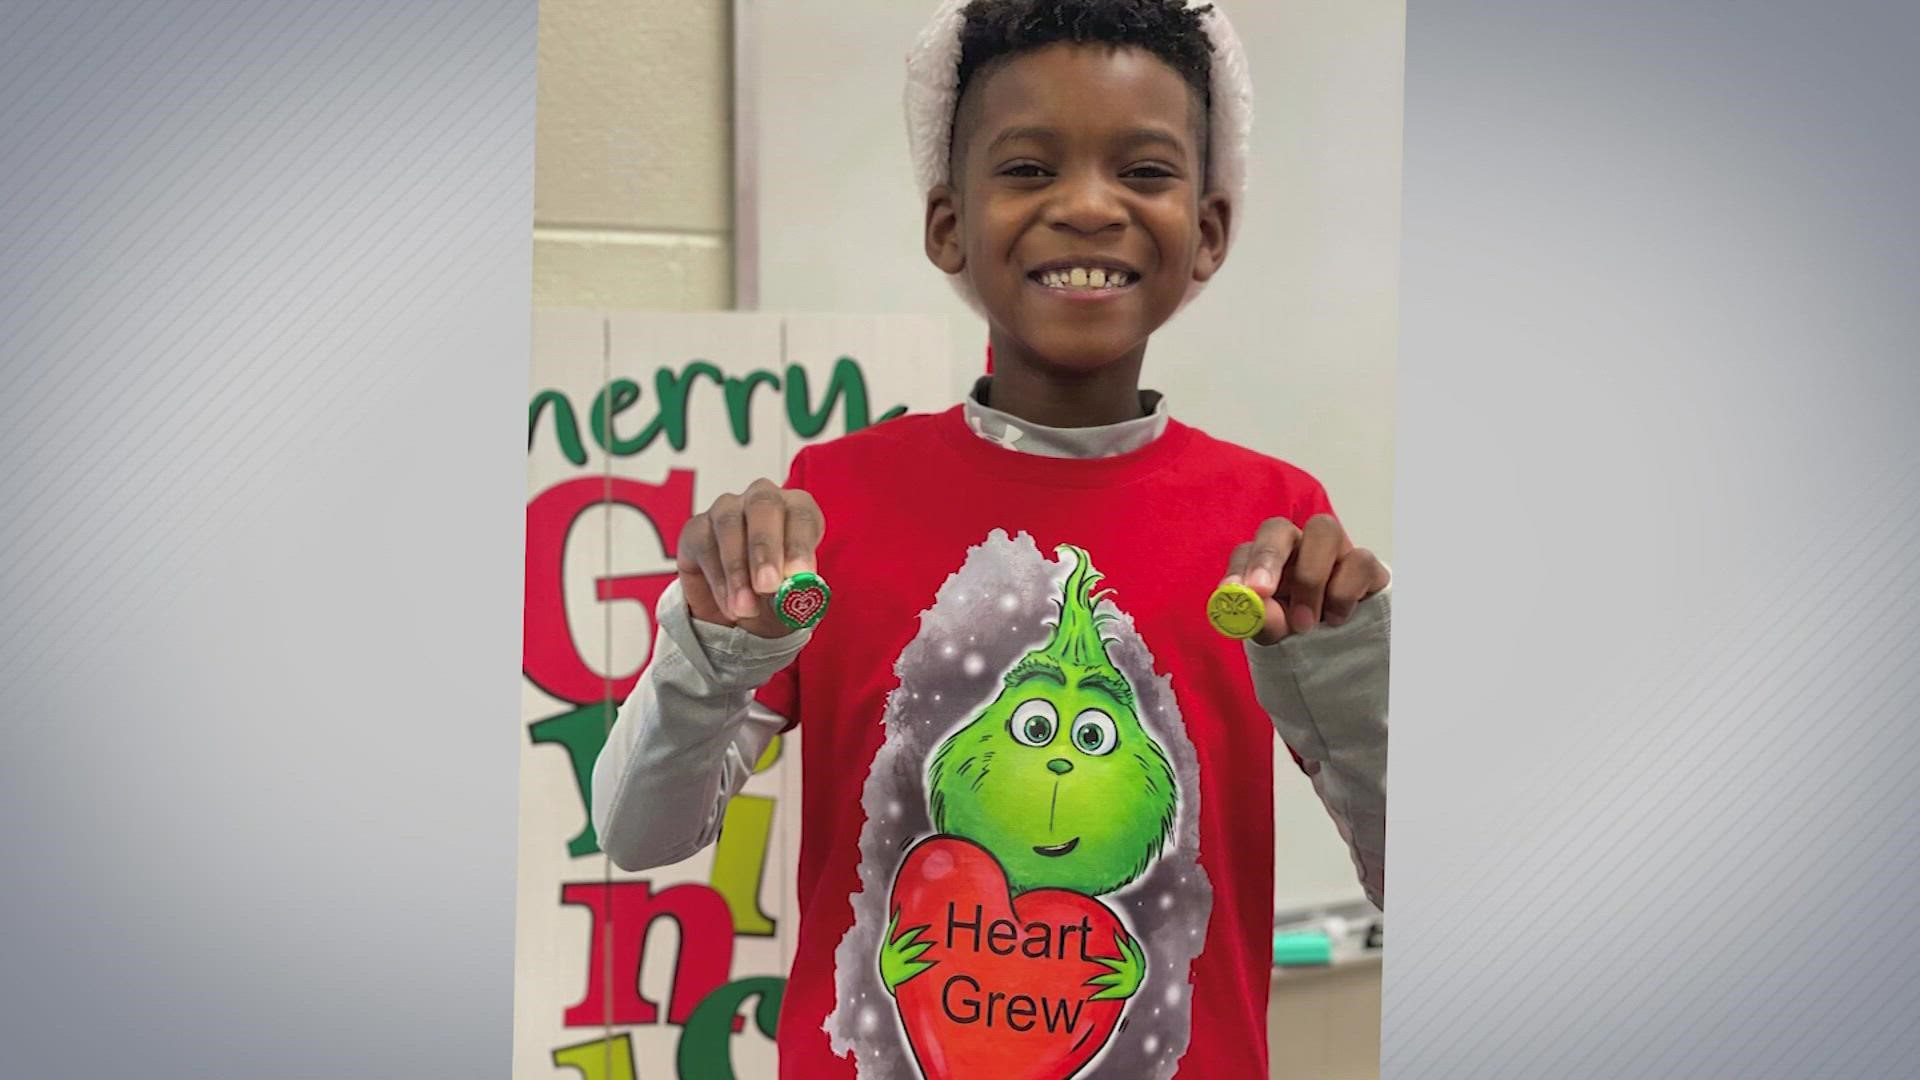 Kingston Murriel's mother connected his story to The Grinch as a life lesson for him and his classmates.